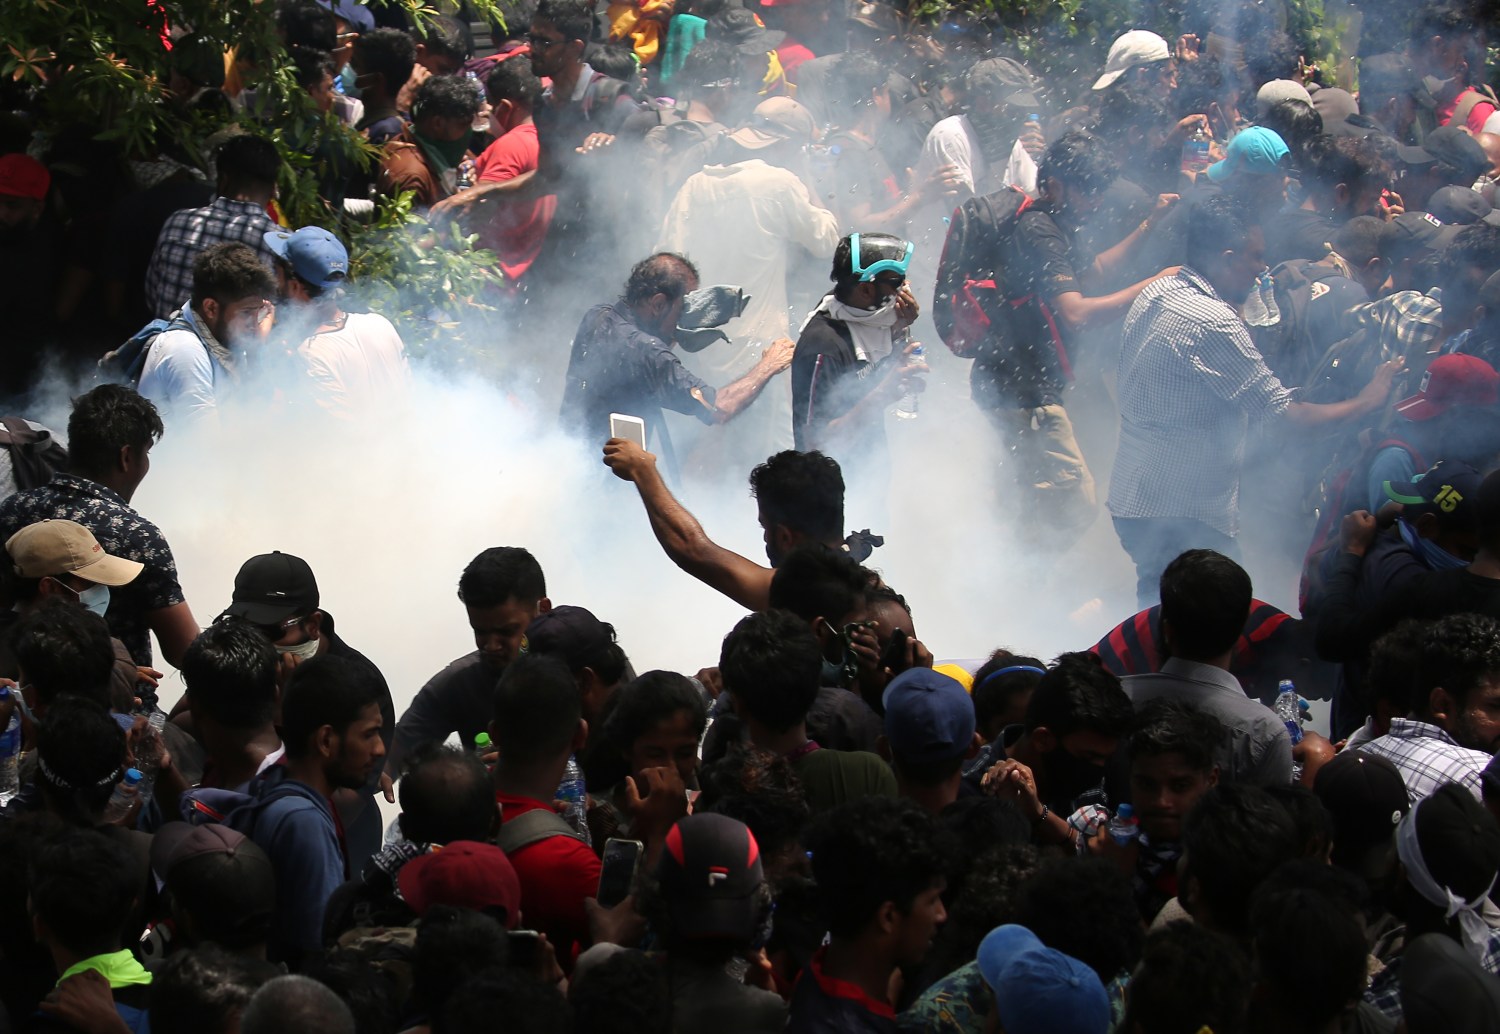 Police use tear gas as Protesters storm the compound of prime minister's office, demanding Ranil Wickremesinghe resign after president Gotabaya Rajapaksa fled the country amid economic crisis in Colombo, Sri Lanka,July 13, 2022. (Photo by Pradeep Dambarage/NurPhoto)NO USE FRANCE